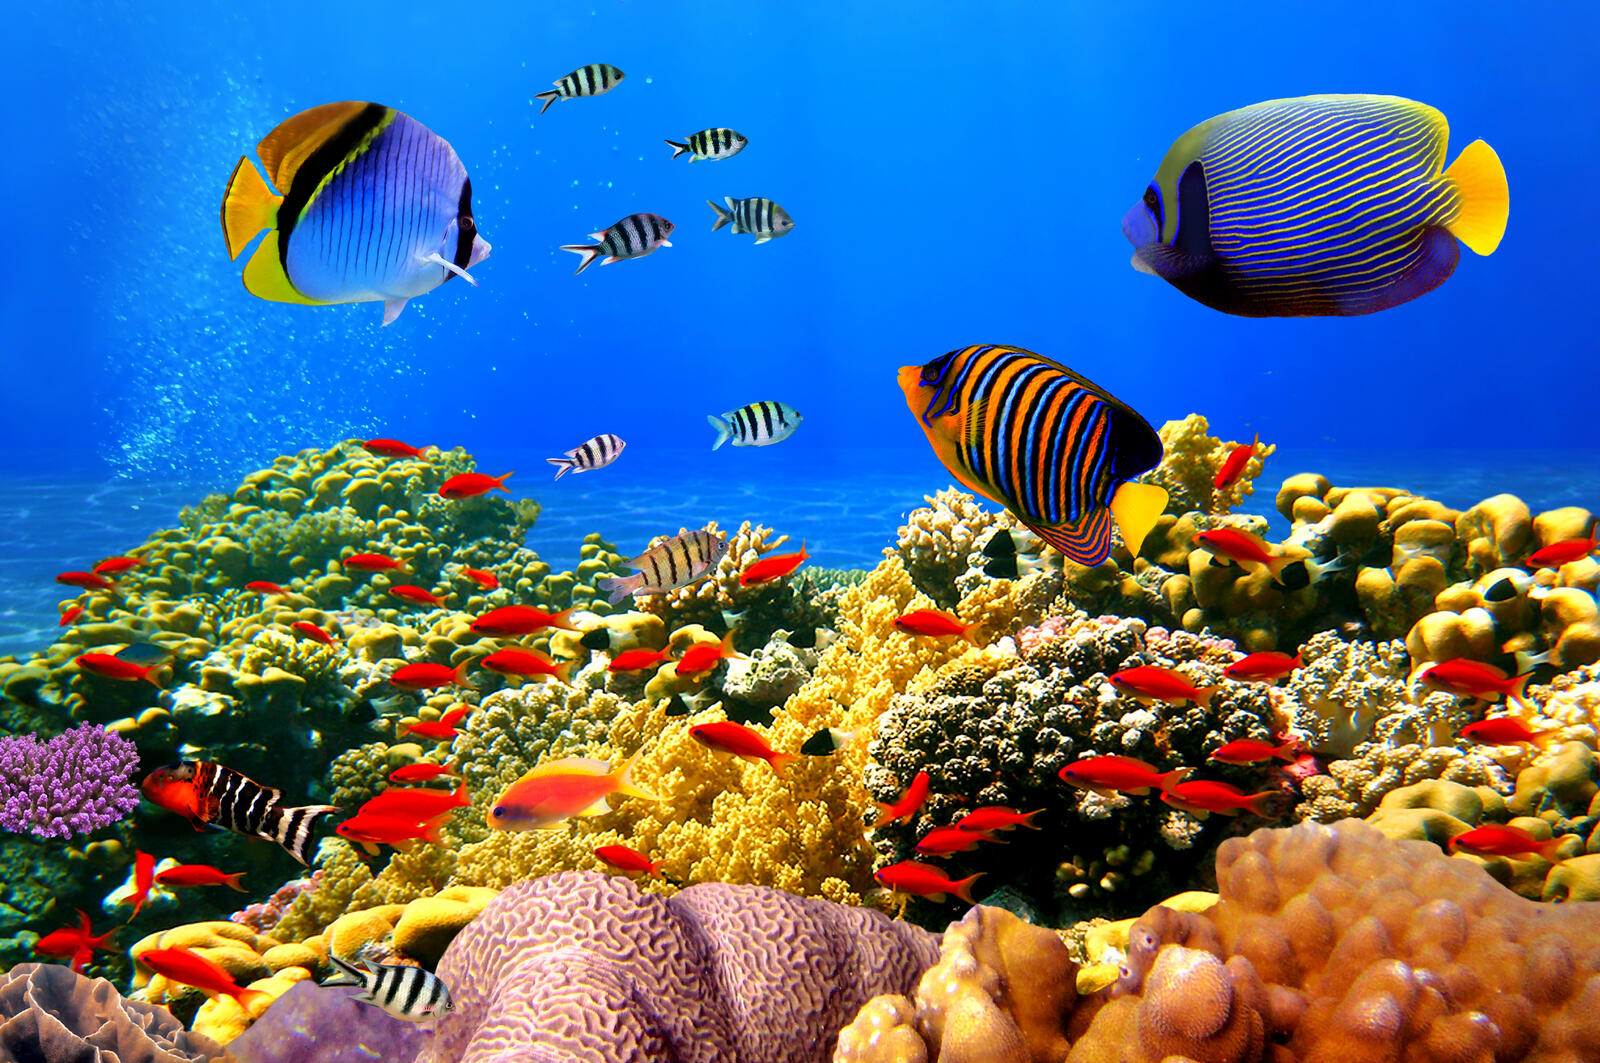 Wallpapers depths of the ocean fish colorful on the desktop